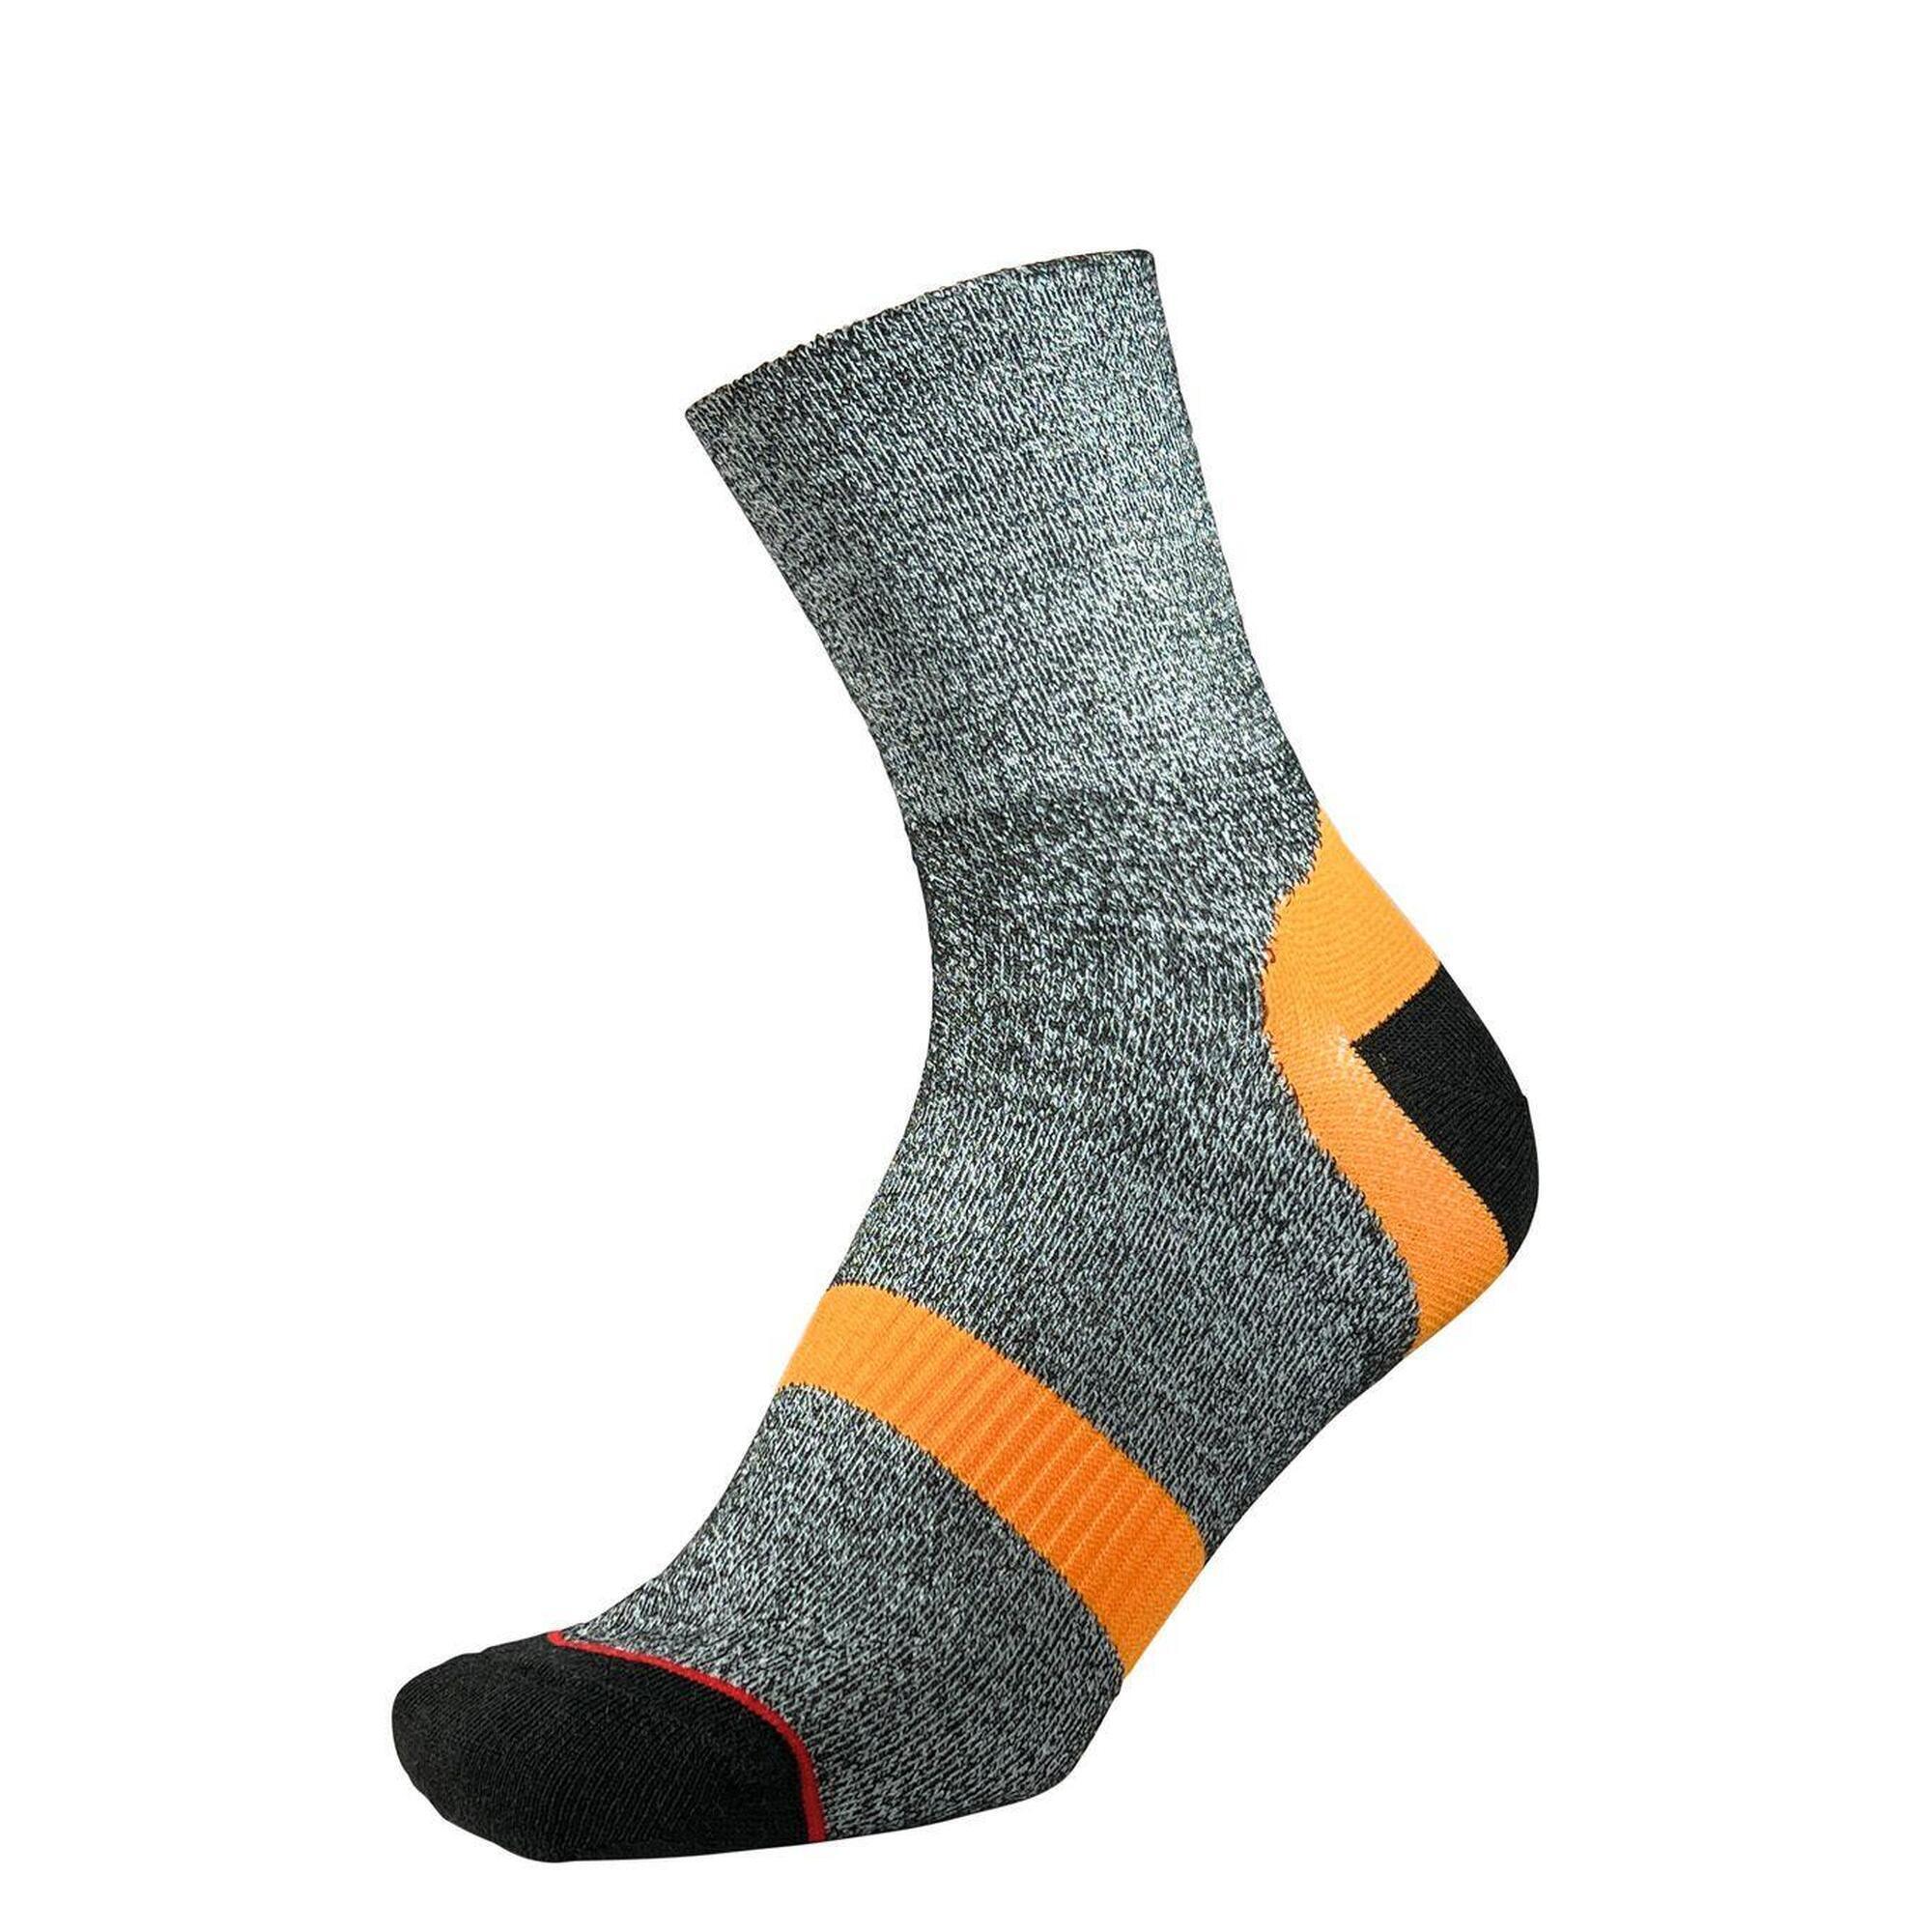 1000 Mile Approach Repreve Double Layer Sock Charcoal Marl Orange 1/1